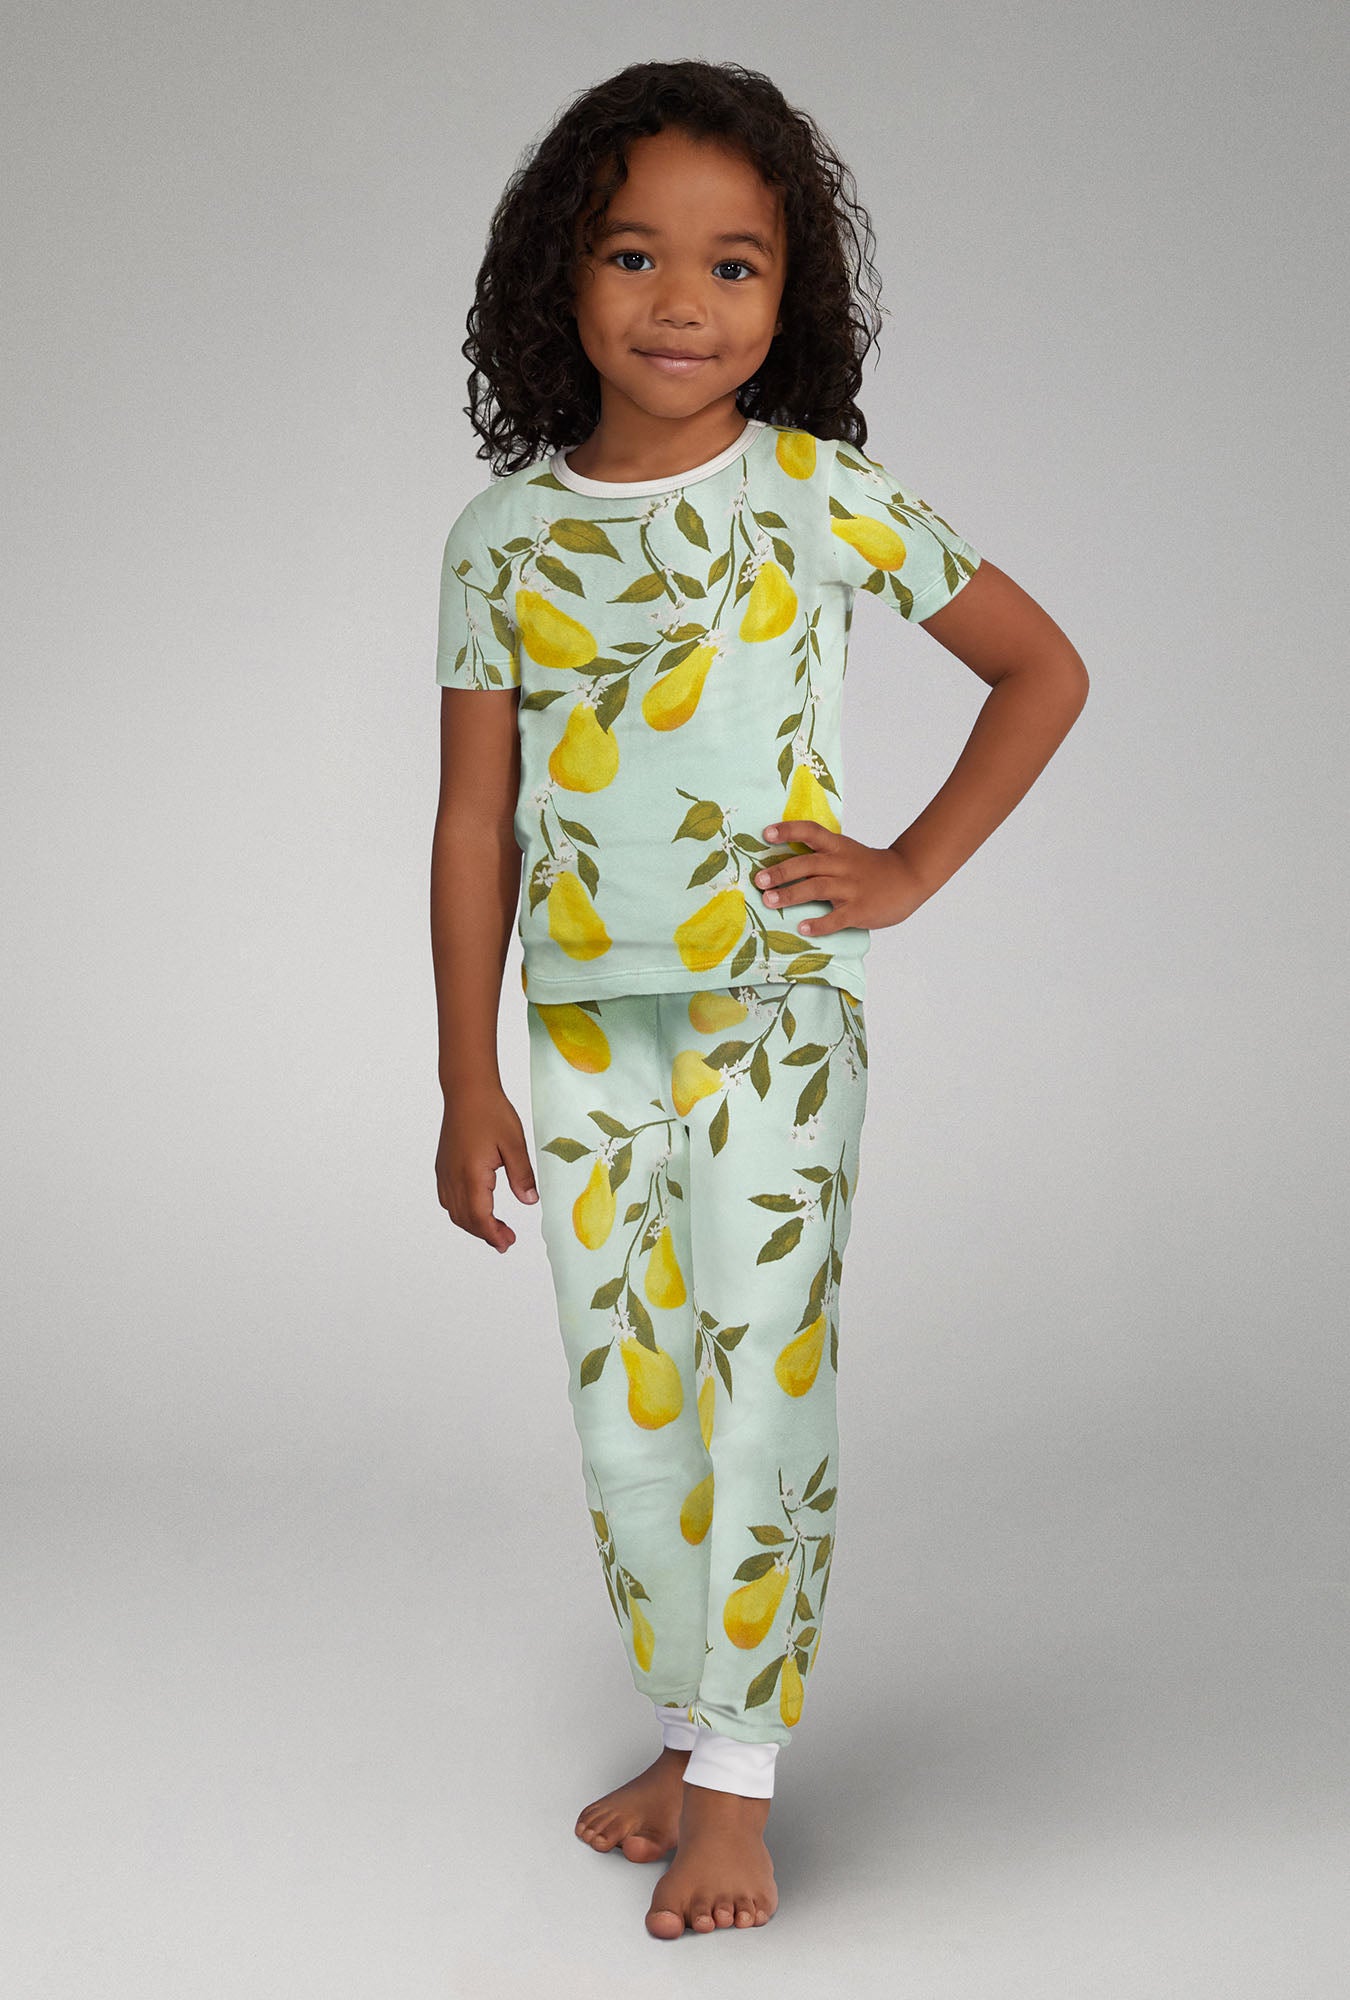 A girl wearing green Short Sleeve Stretch Jersey Kids PJ Set with Pear Tree print